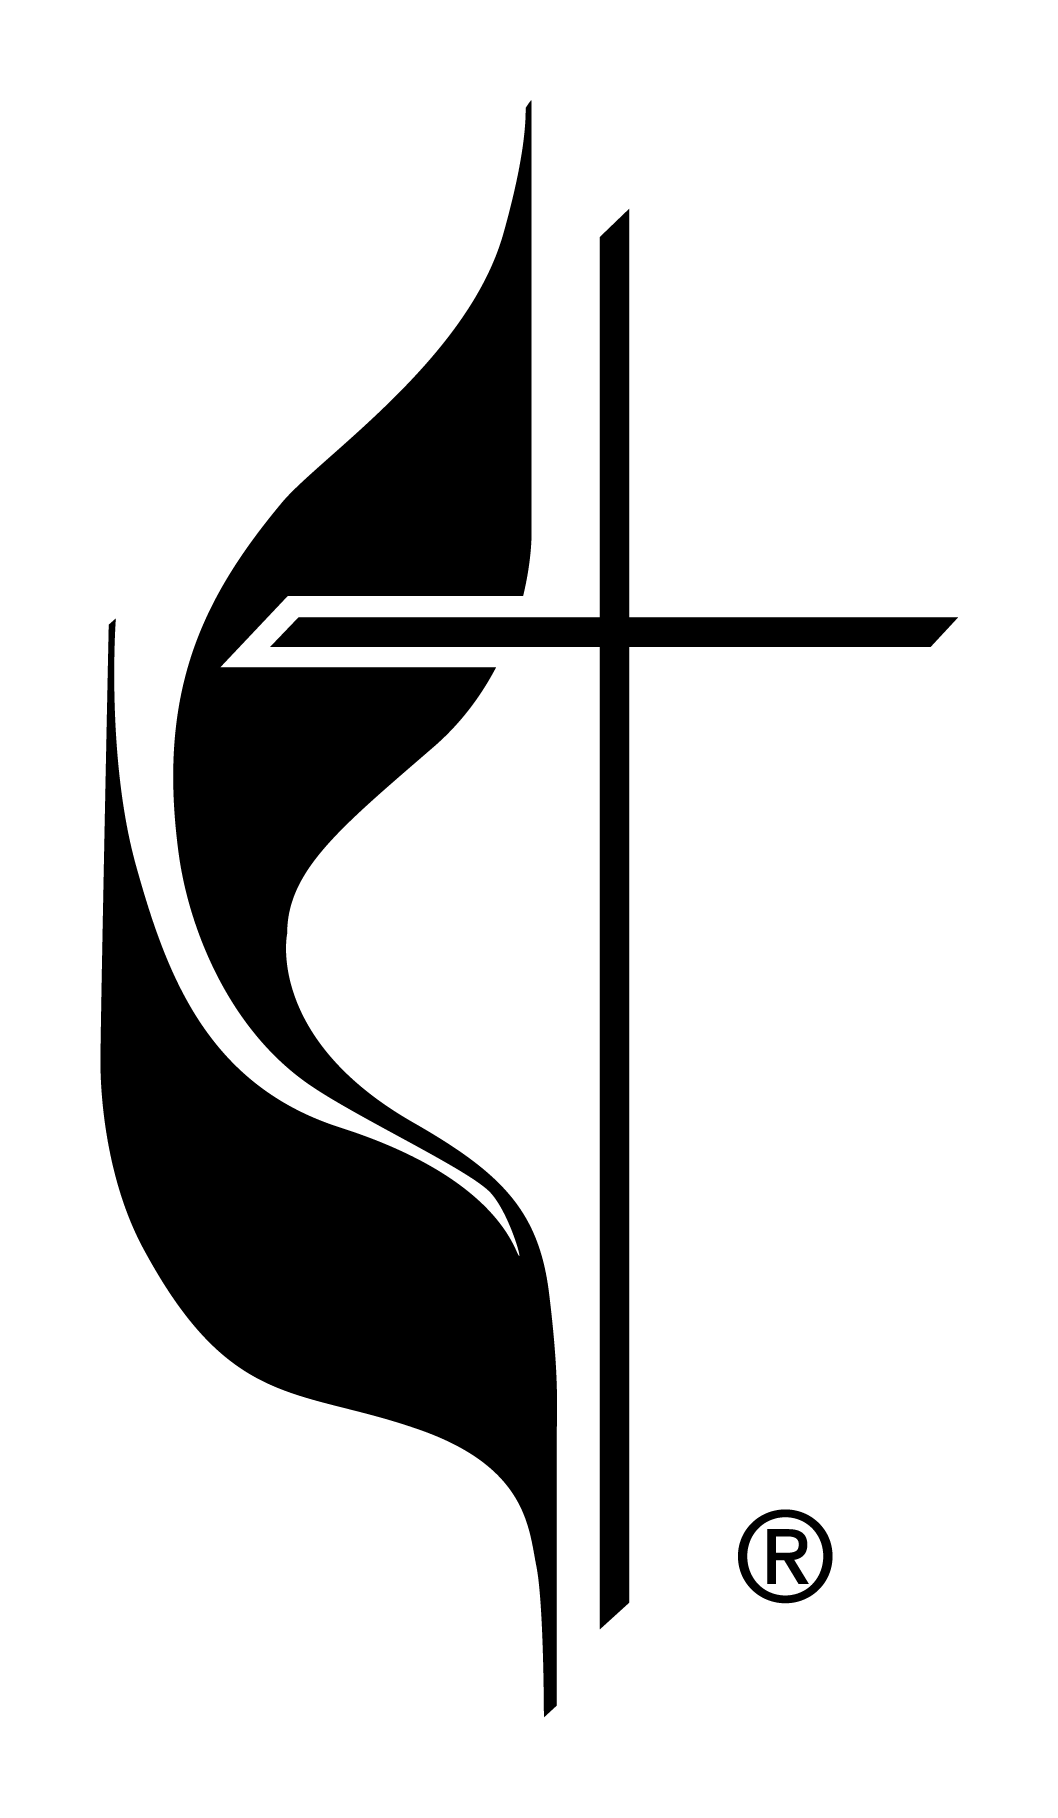 Cathloic Cross Logo - United methodist cross and flame image download - RR collections